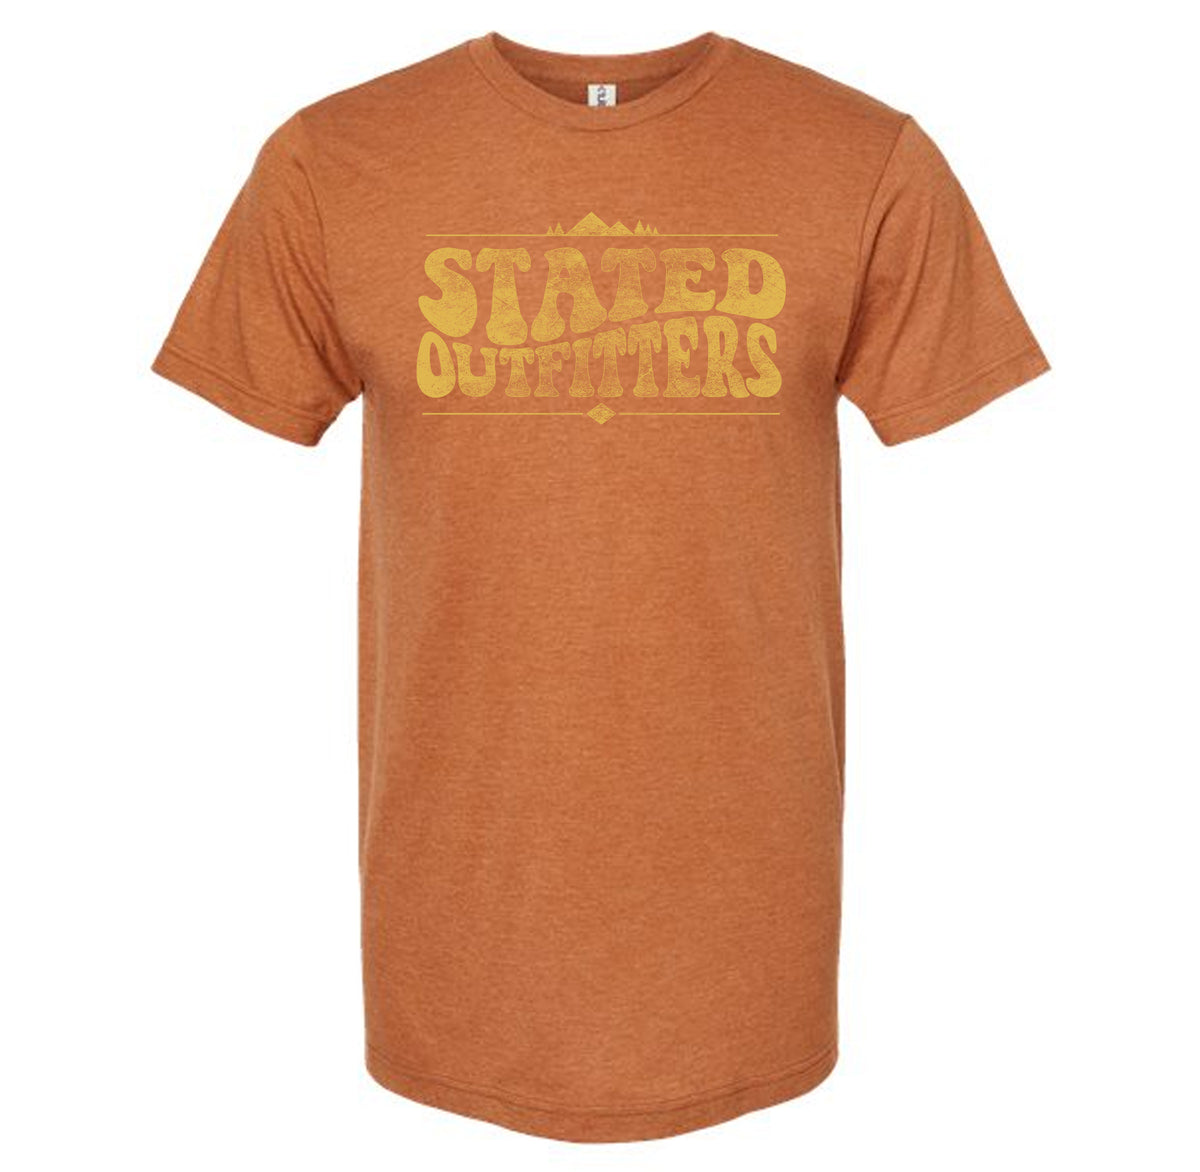 Stated Outfitters Funky Tee